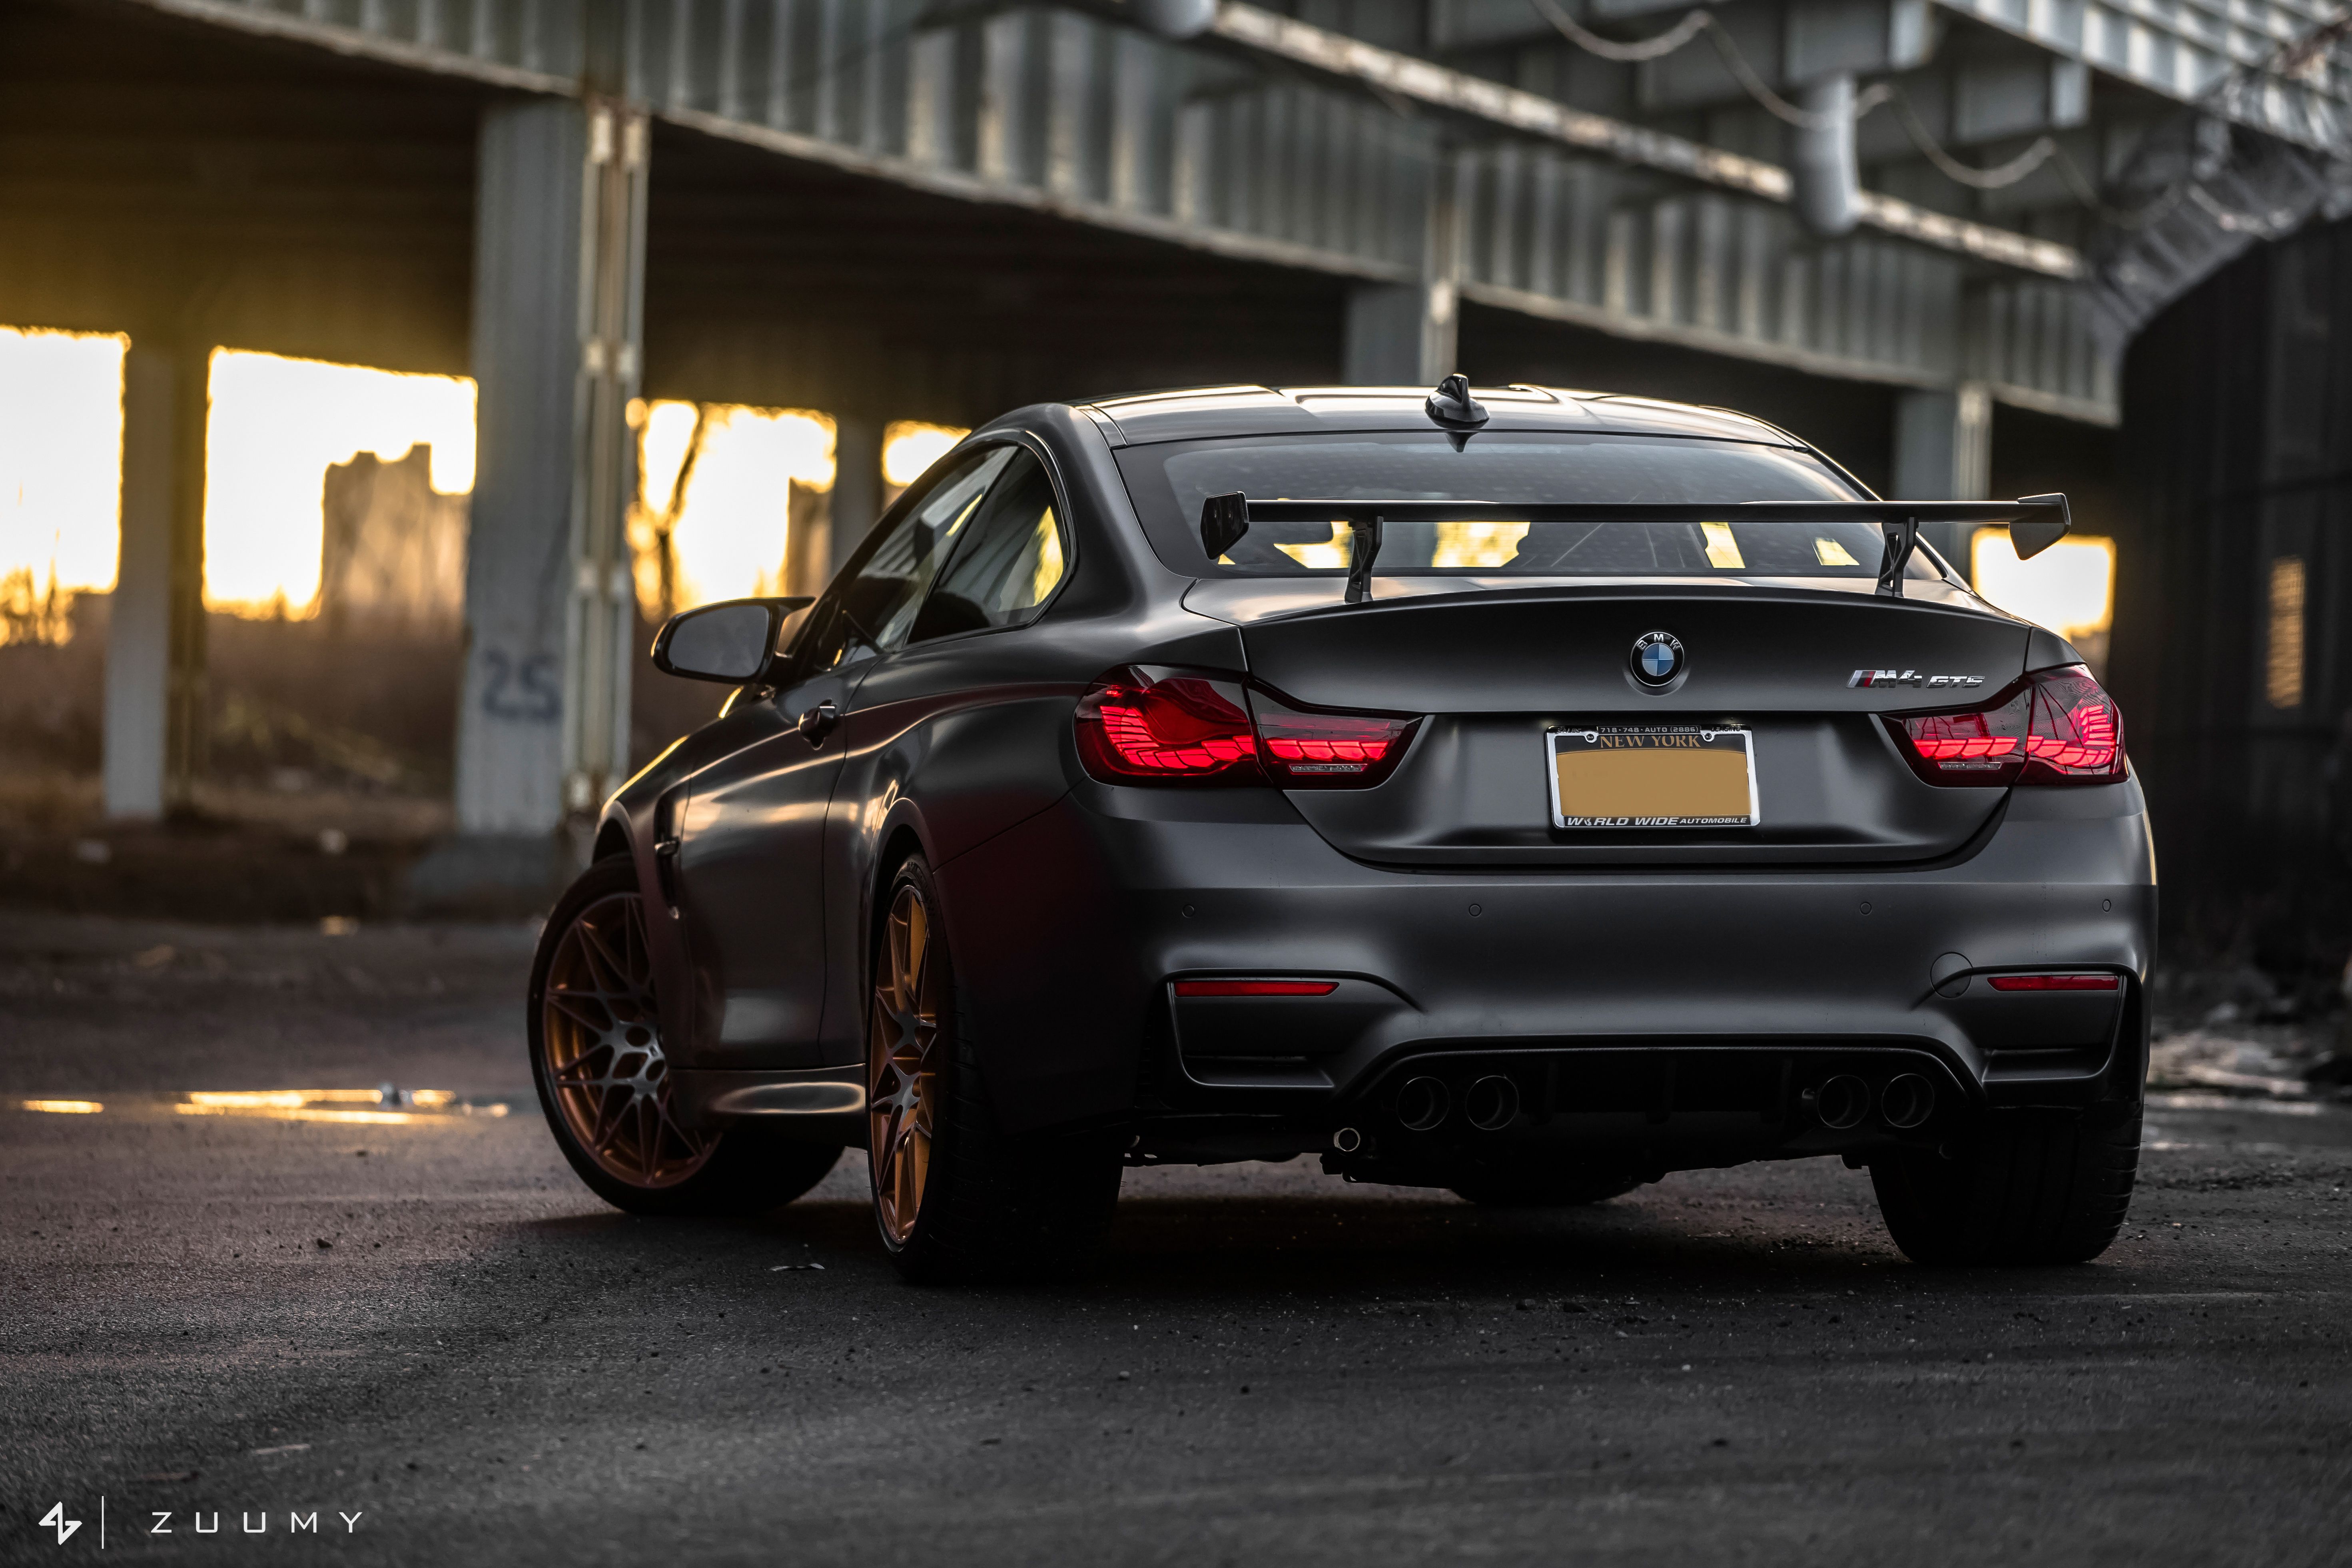 Your Ridiculously Awesome BMW M4 GTS Wallpaper Is Here